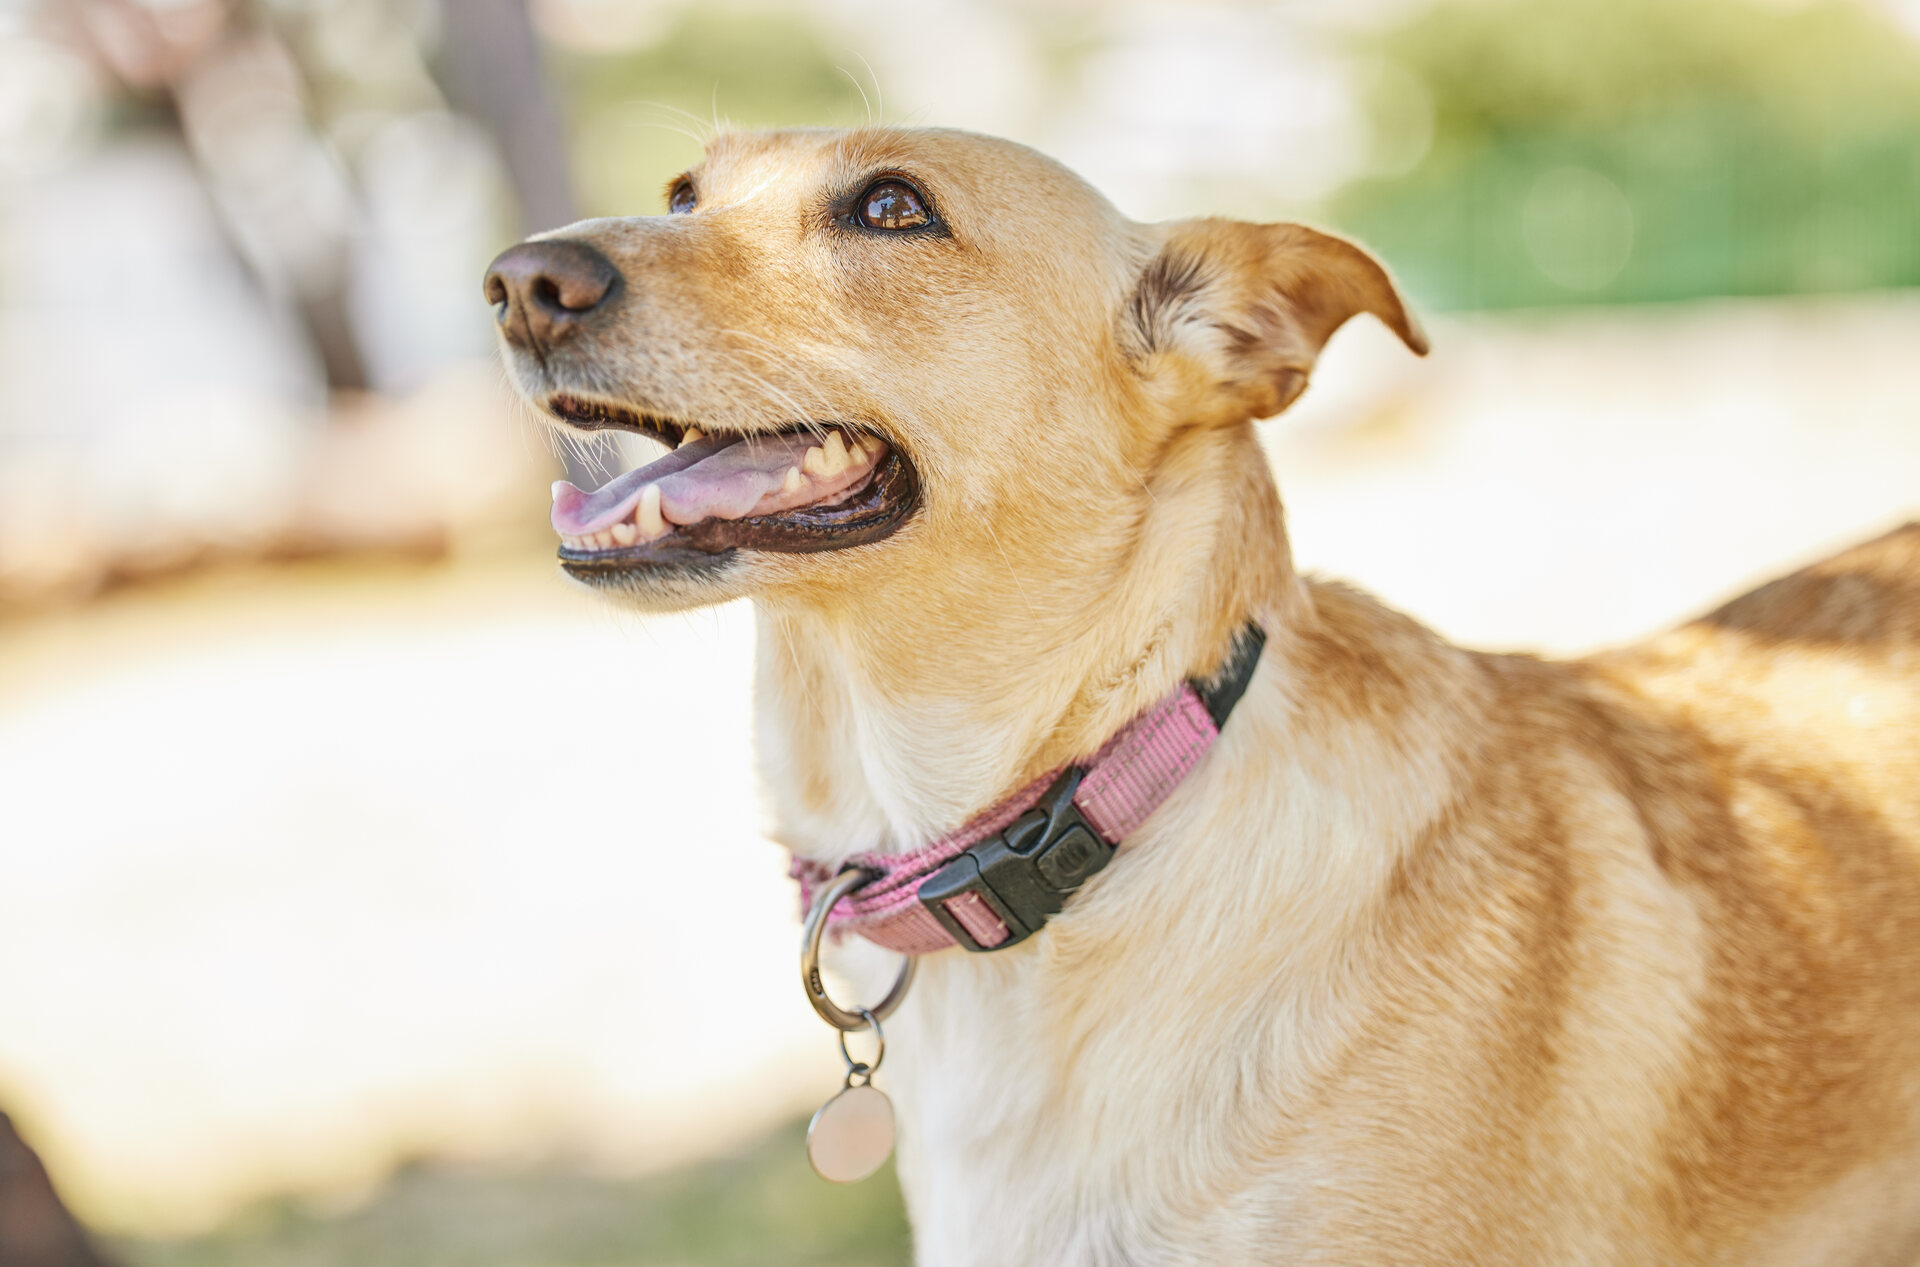 A dog wearing a pink collar with an ID tag